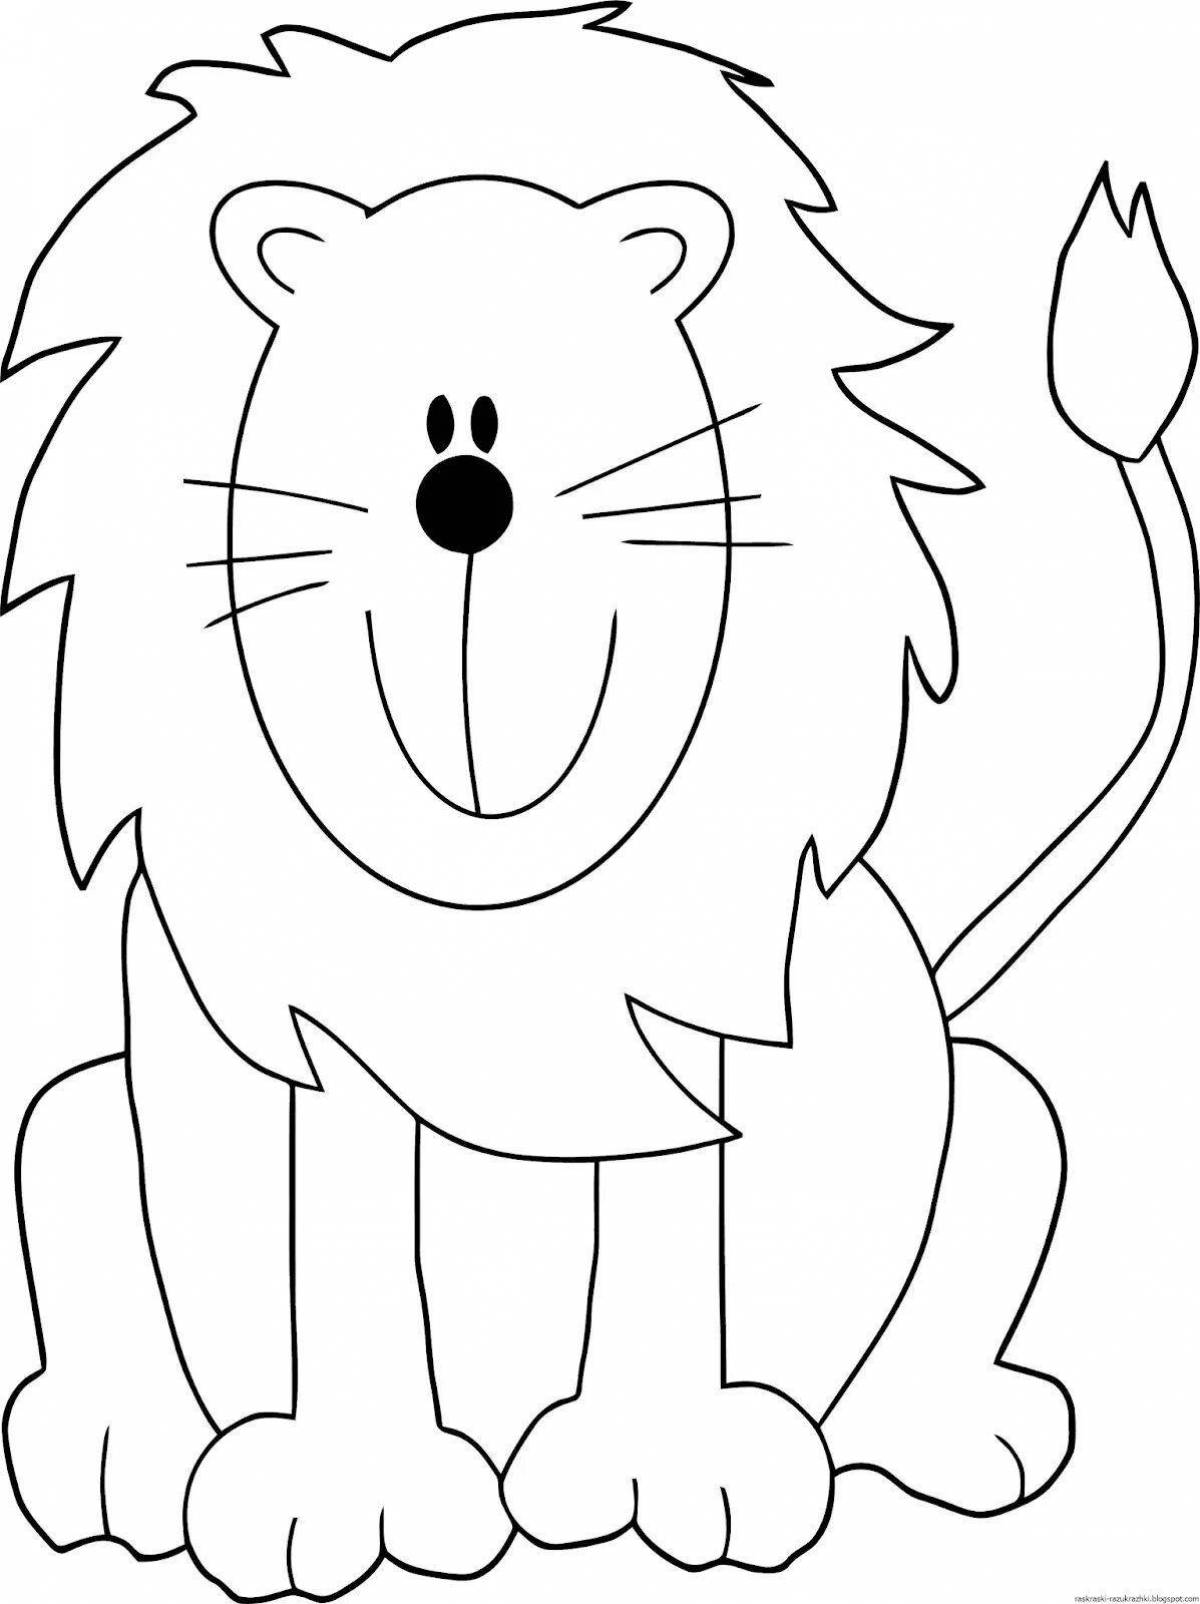 Glorious lion coloring page